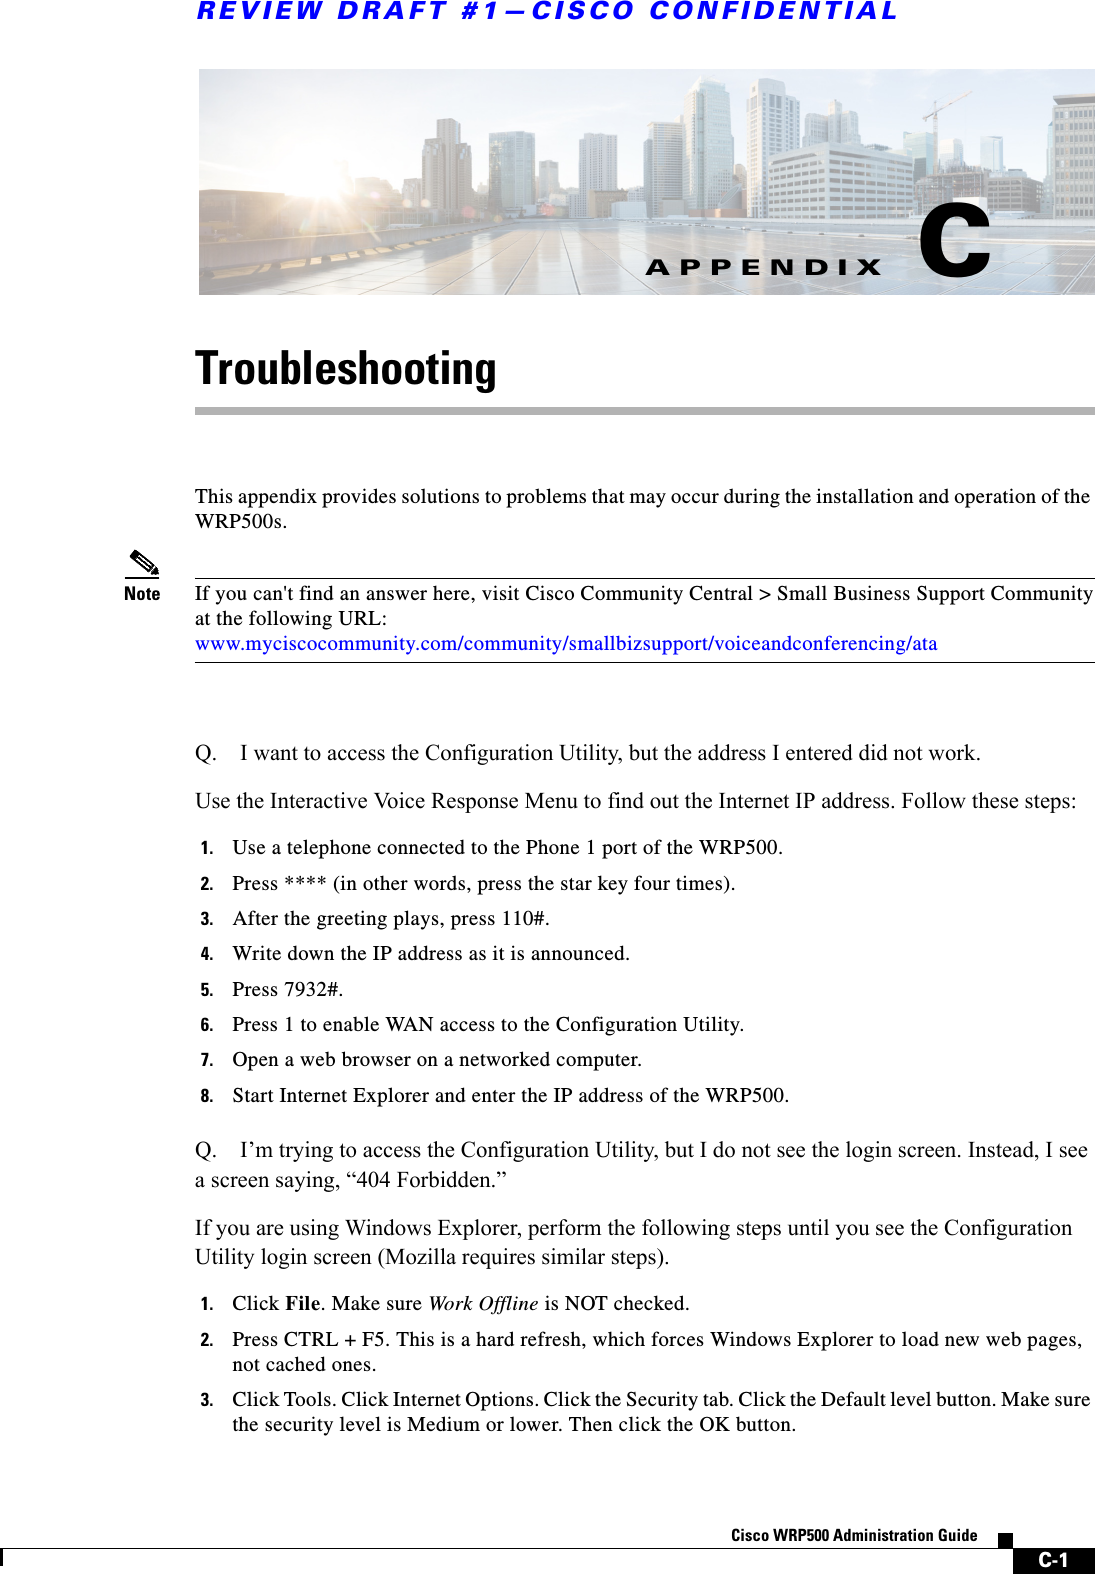 C-1Cisco WRP500 Administration Guide APPENDIXREVIEW DRAFT #1—CISCO CONFIDENTIALCTroubleshootingThis appendix provides solutions to problems that may occur during the installation and operation of the WRP500s. Note If you can&apos;t find an answer here, visit Cisco Community Central &gt; Small Business Support Communityat the following URL:www.myciscocommunity.com/community/smallbizsupport/voiceandconferencing/ataQ. I want to access the Configuration Utility, but the address I entered did not work.Use the Interactive Voice Response Menu to find out the Internet IP address. Follow these steps:1. Use a telephone connected to the Phone 1 port of the WRP500.2. Press **** (in other words, press the star key four times).3. After the greeting plays, press 110#.4. Write down the IP address as it is announced.5. Press 7932#.6. Press 1 to enable WAN access to the Configuration Utility.7. Open a web browser on a networked computer.8. Start Internet Explorer and enter the IP address of the WRP500.Q. I’m trying to access the Configuration Utility, but I do not see the login screen. Instead, I see a screen saying, “404 Forbidden.”If you are using Windows Explorer, perform the following steps until you see the Configuration Utility login screen (Mozilla requires similar steps).1. Click File. Make sure Work Offline is NOT checked.2. Press CTRL + F5. This is a hard refresh, which forces Windows Explorer to load new web pages, not cached ones.3. Click Tools. Click Internet Options. Click the Security tab. Click the Default level button. Make sure the security level is Medium or lower. Then click the OK button.